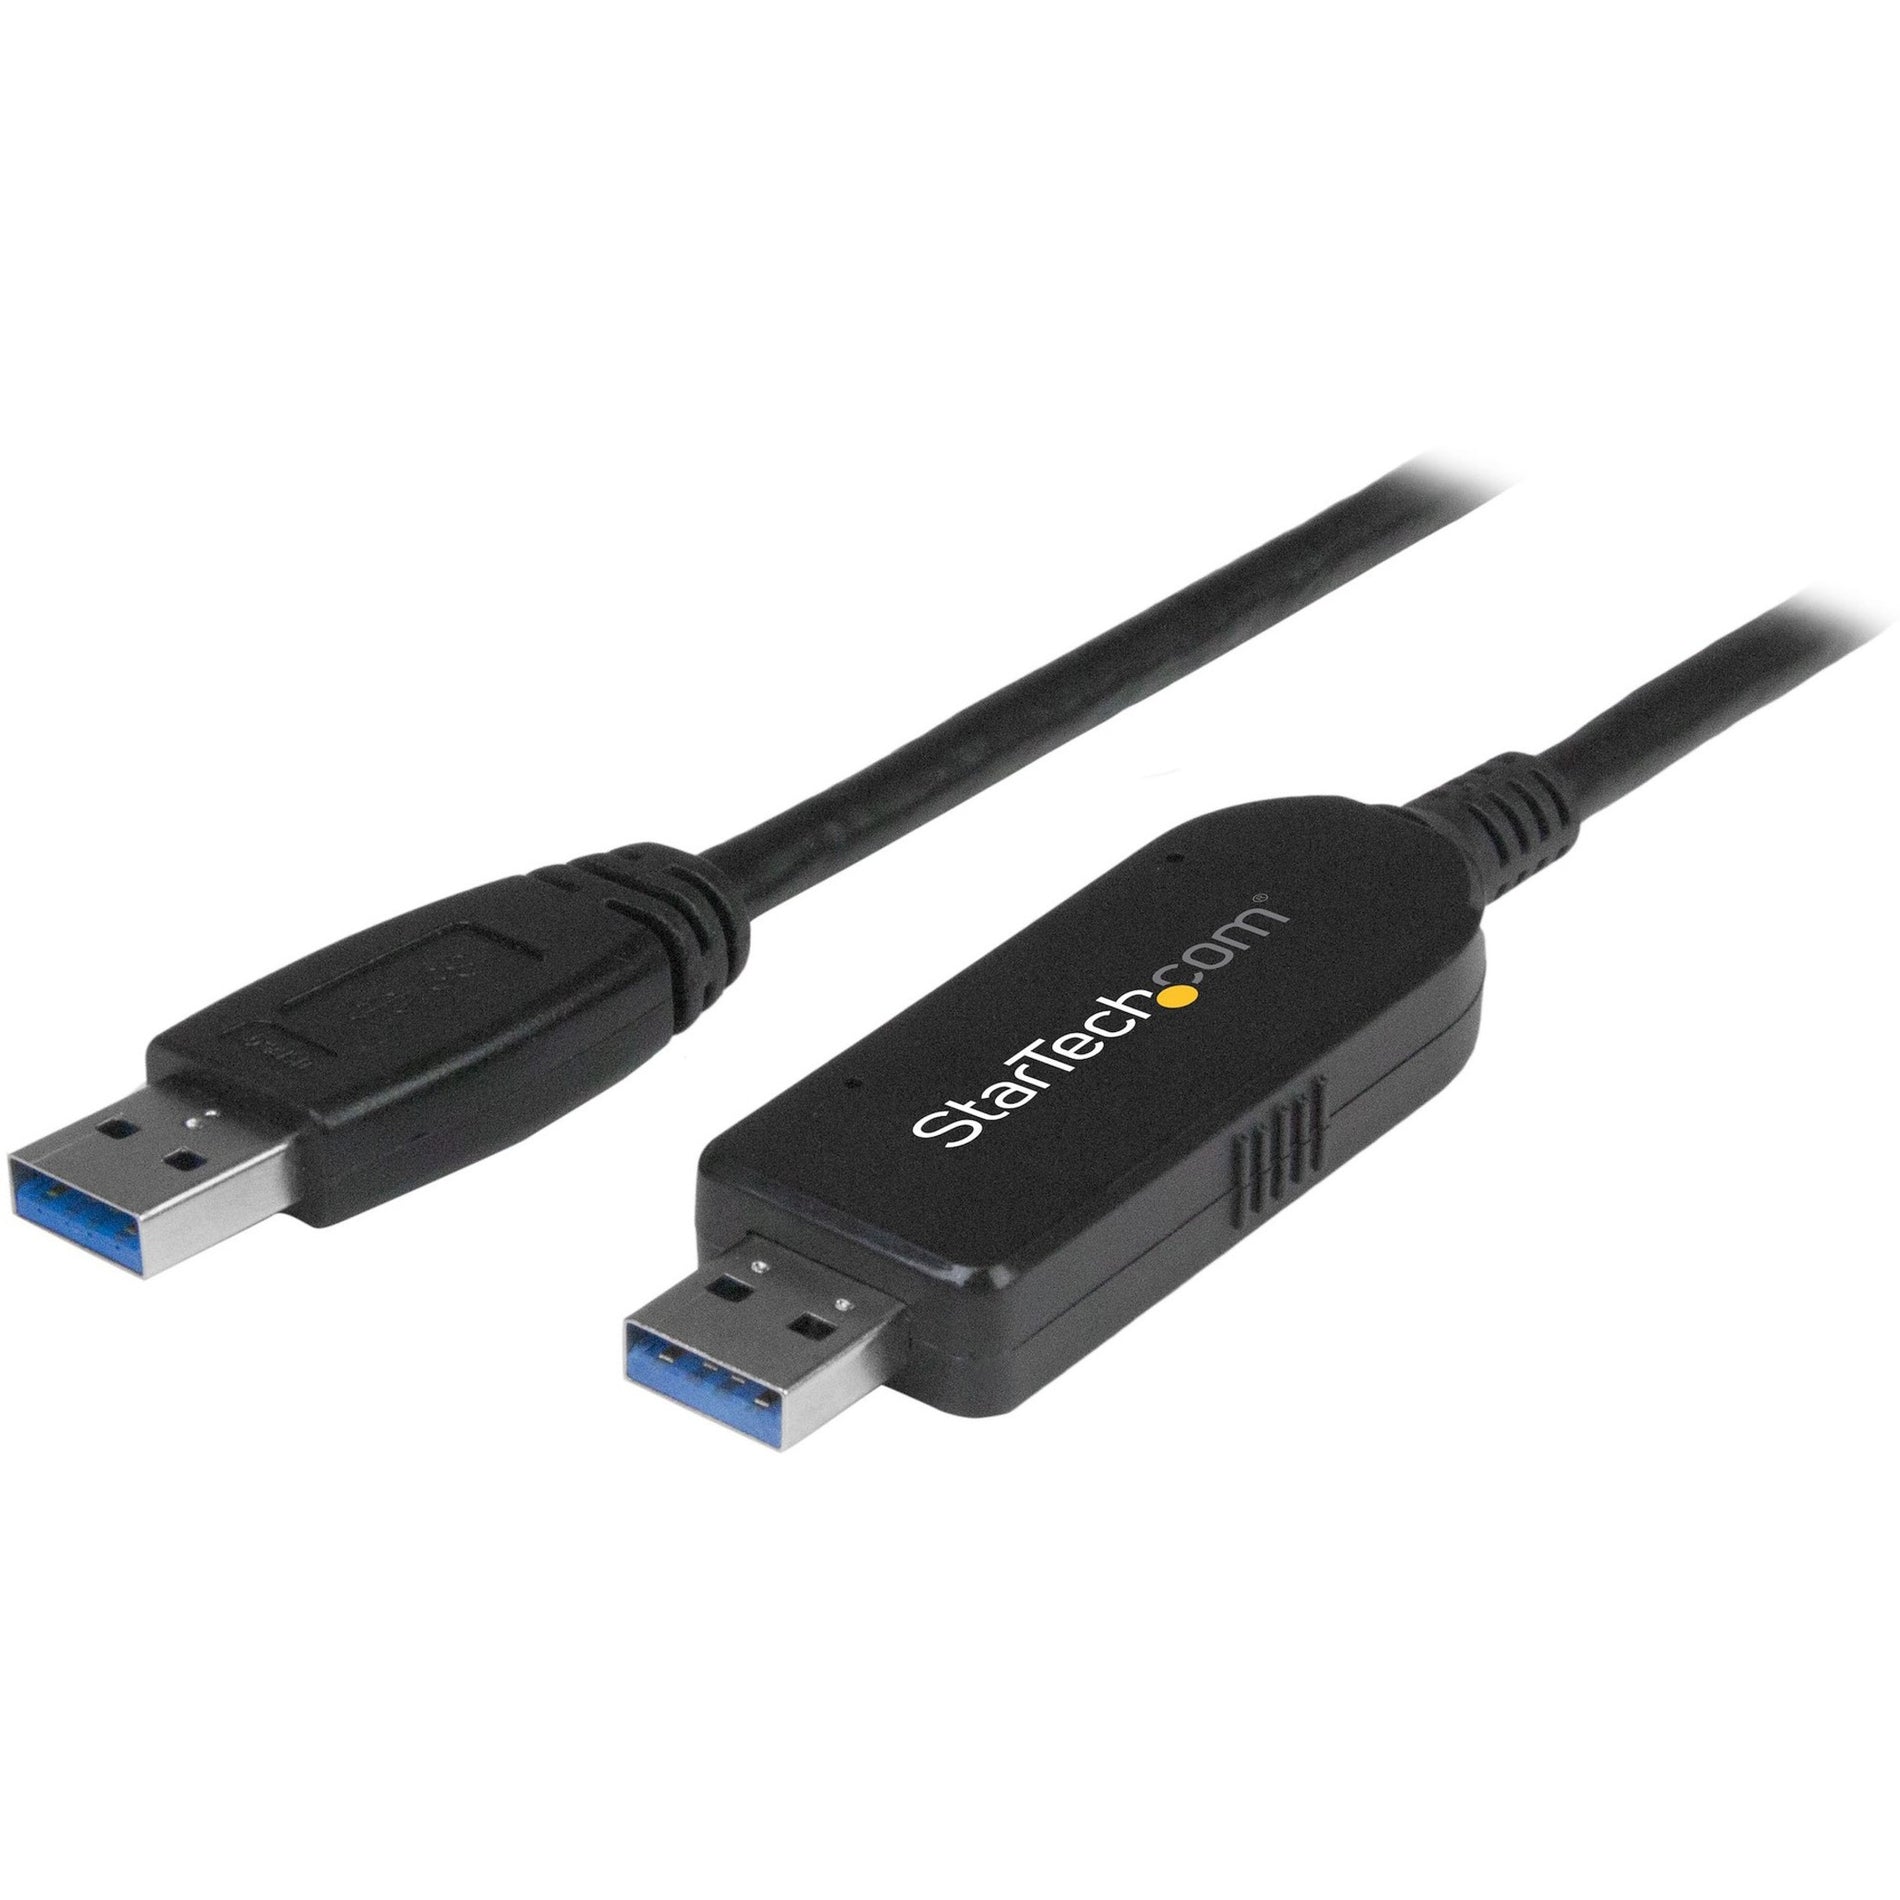 StarTech.com USB3LINK USB 3.0 Data Transfer Cable for Mac and Windows - Fast and Easy Upgrades, 2m (6ft)